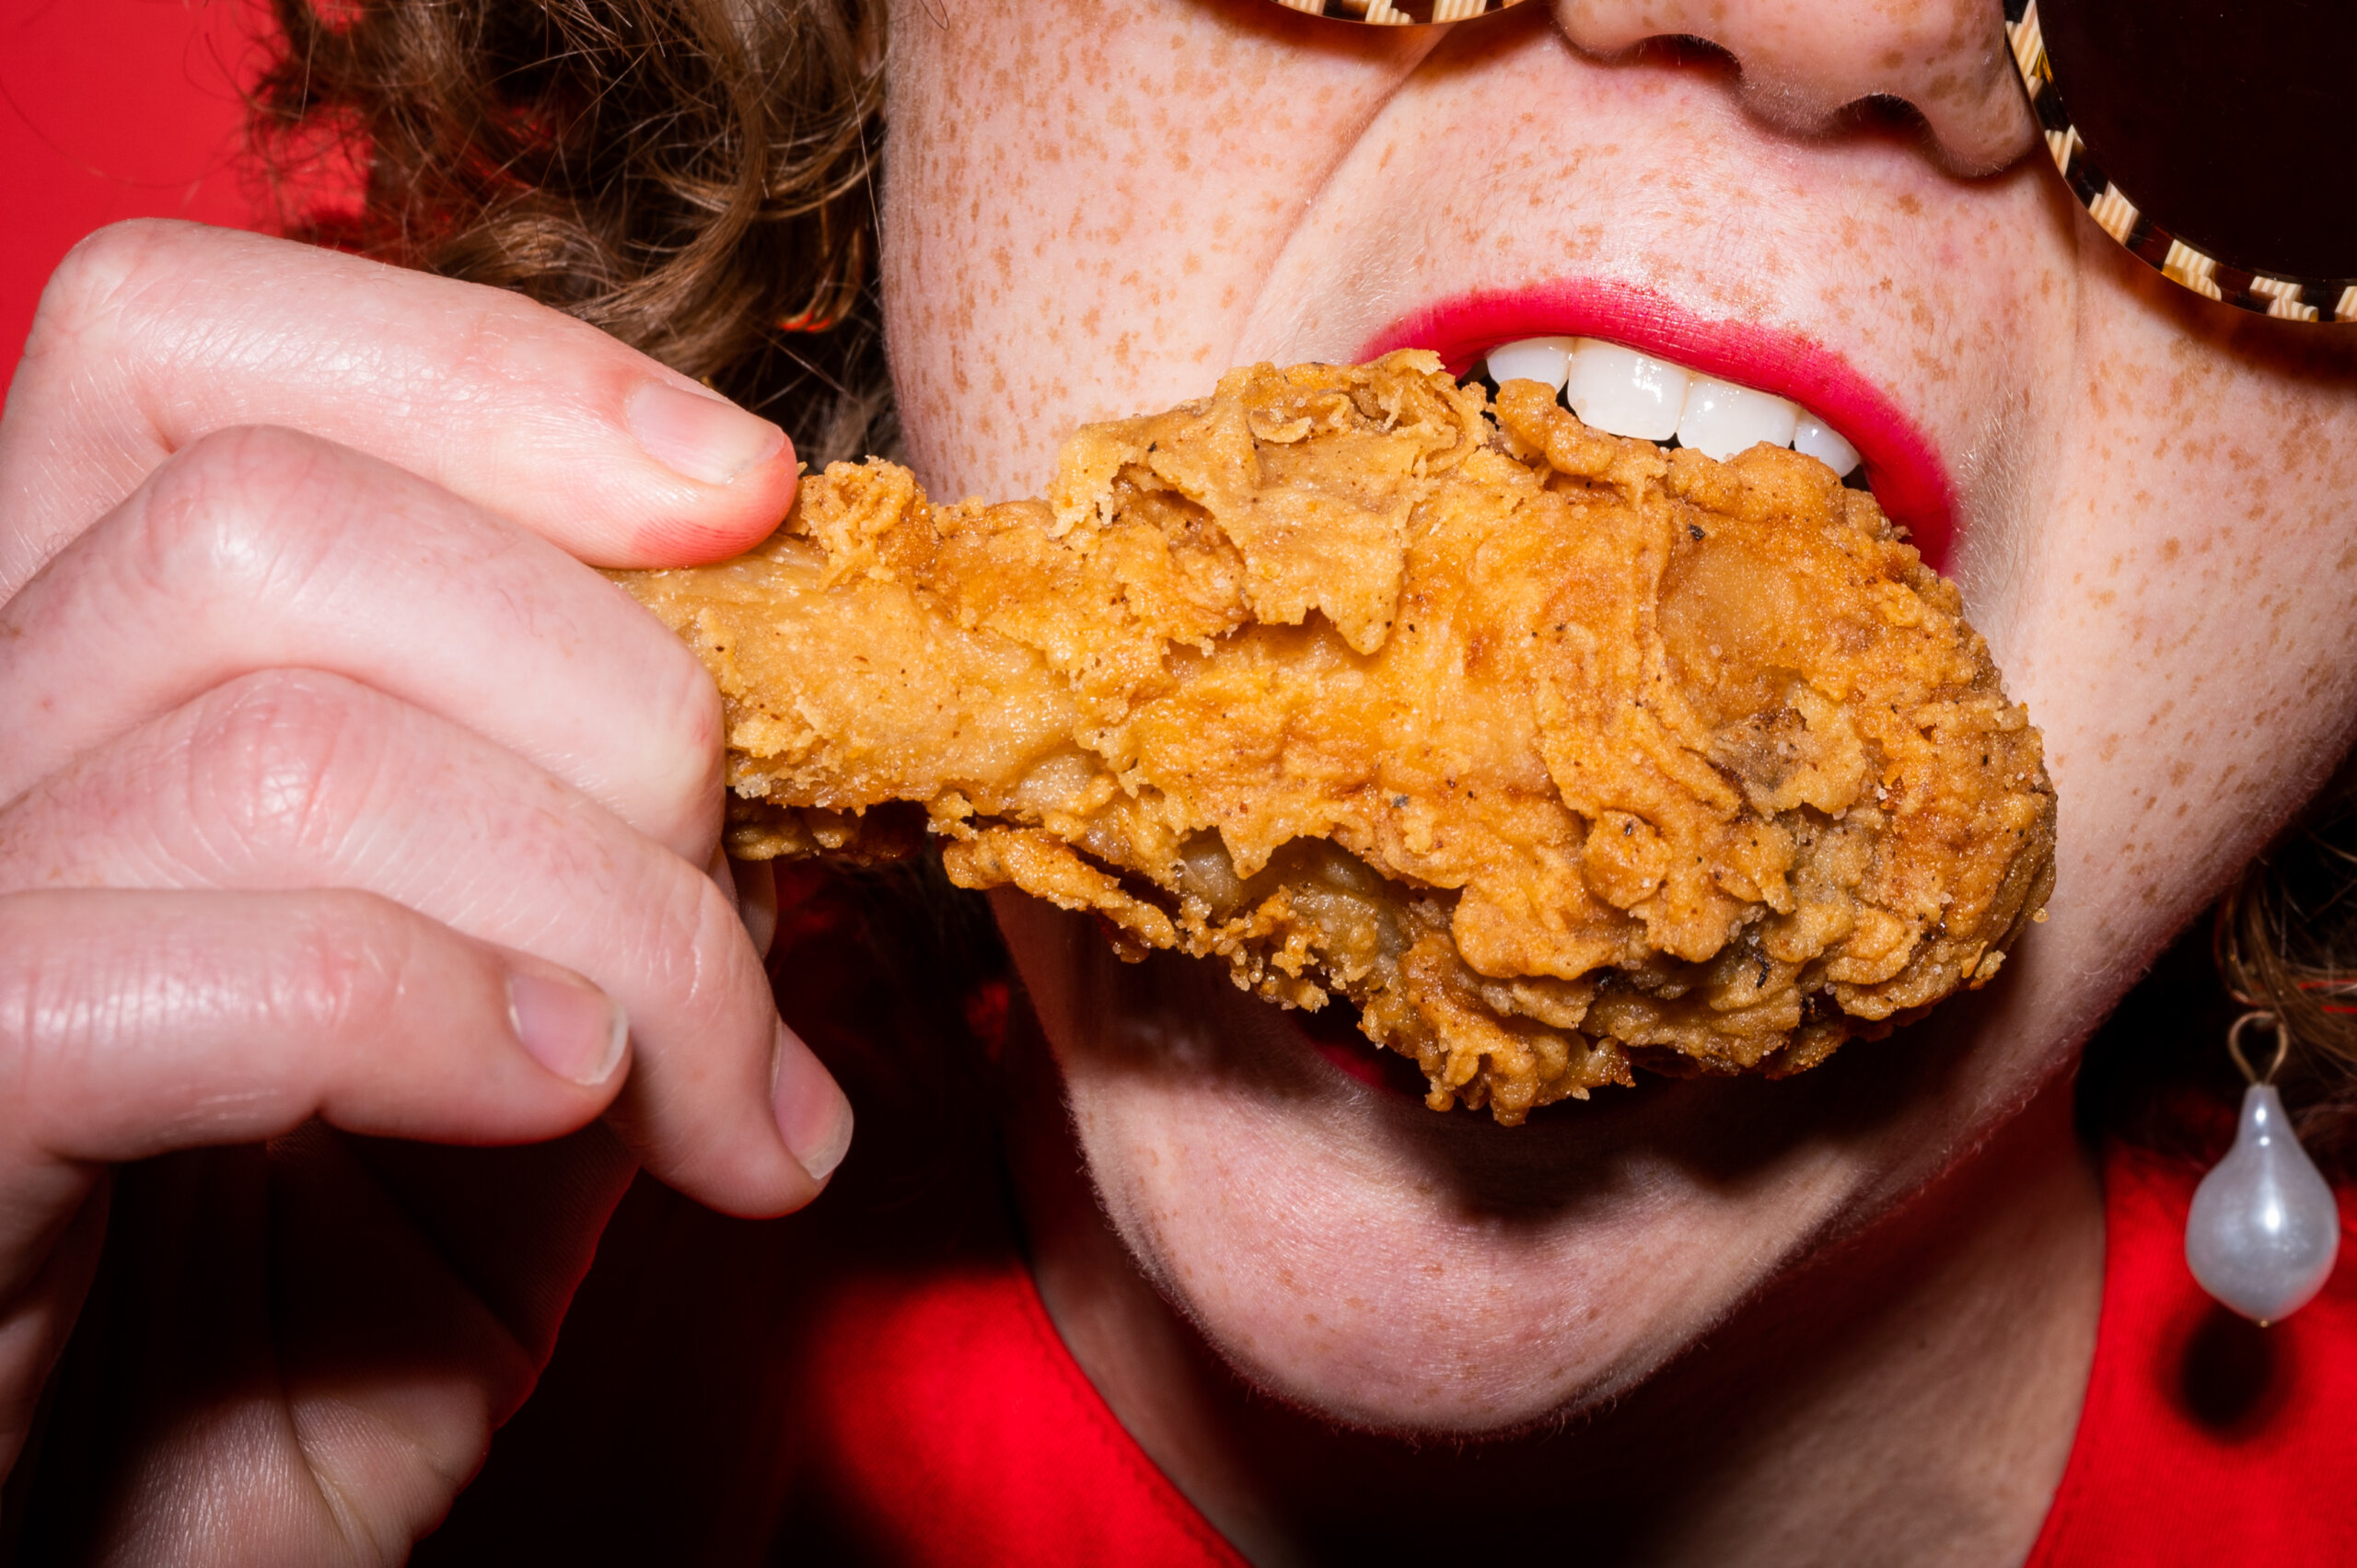 A woman with red lipstick bites into a fried chicken drumstick